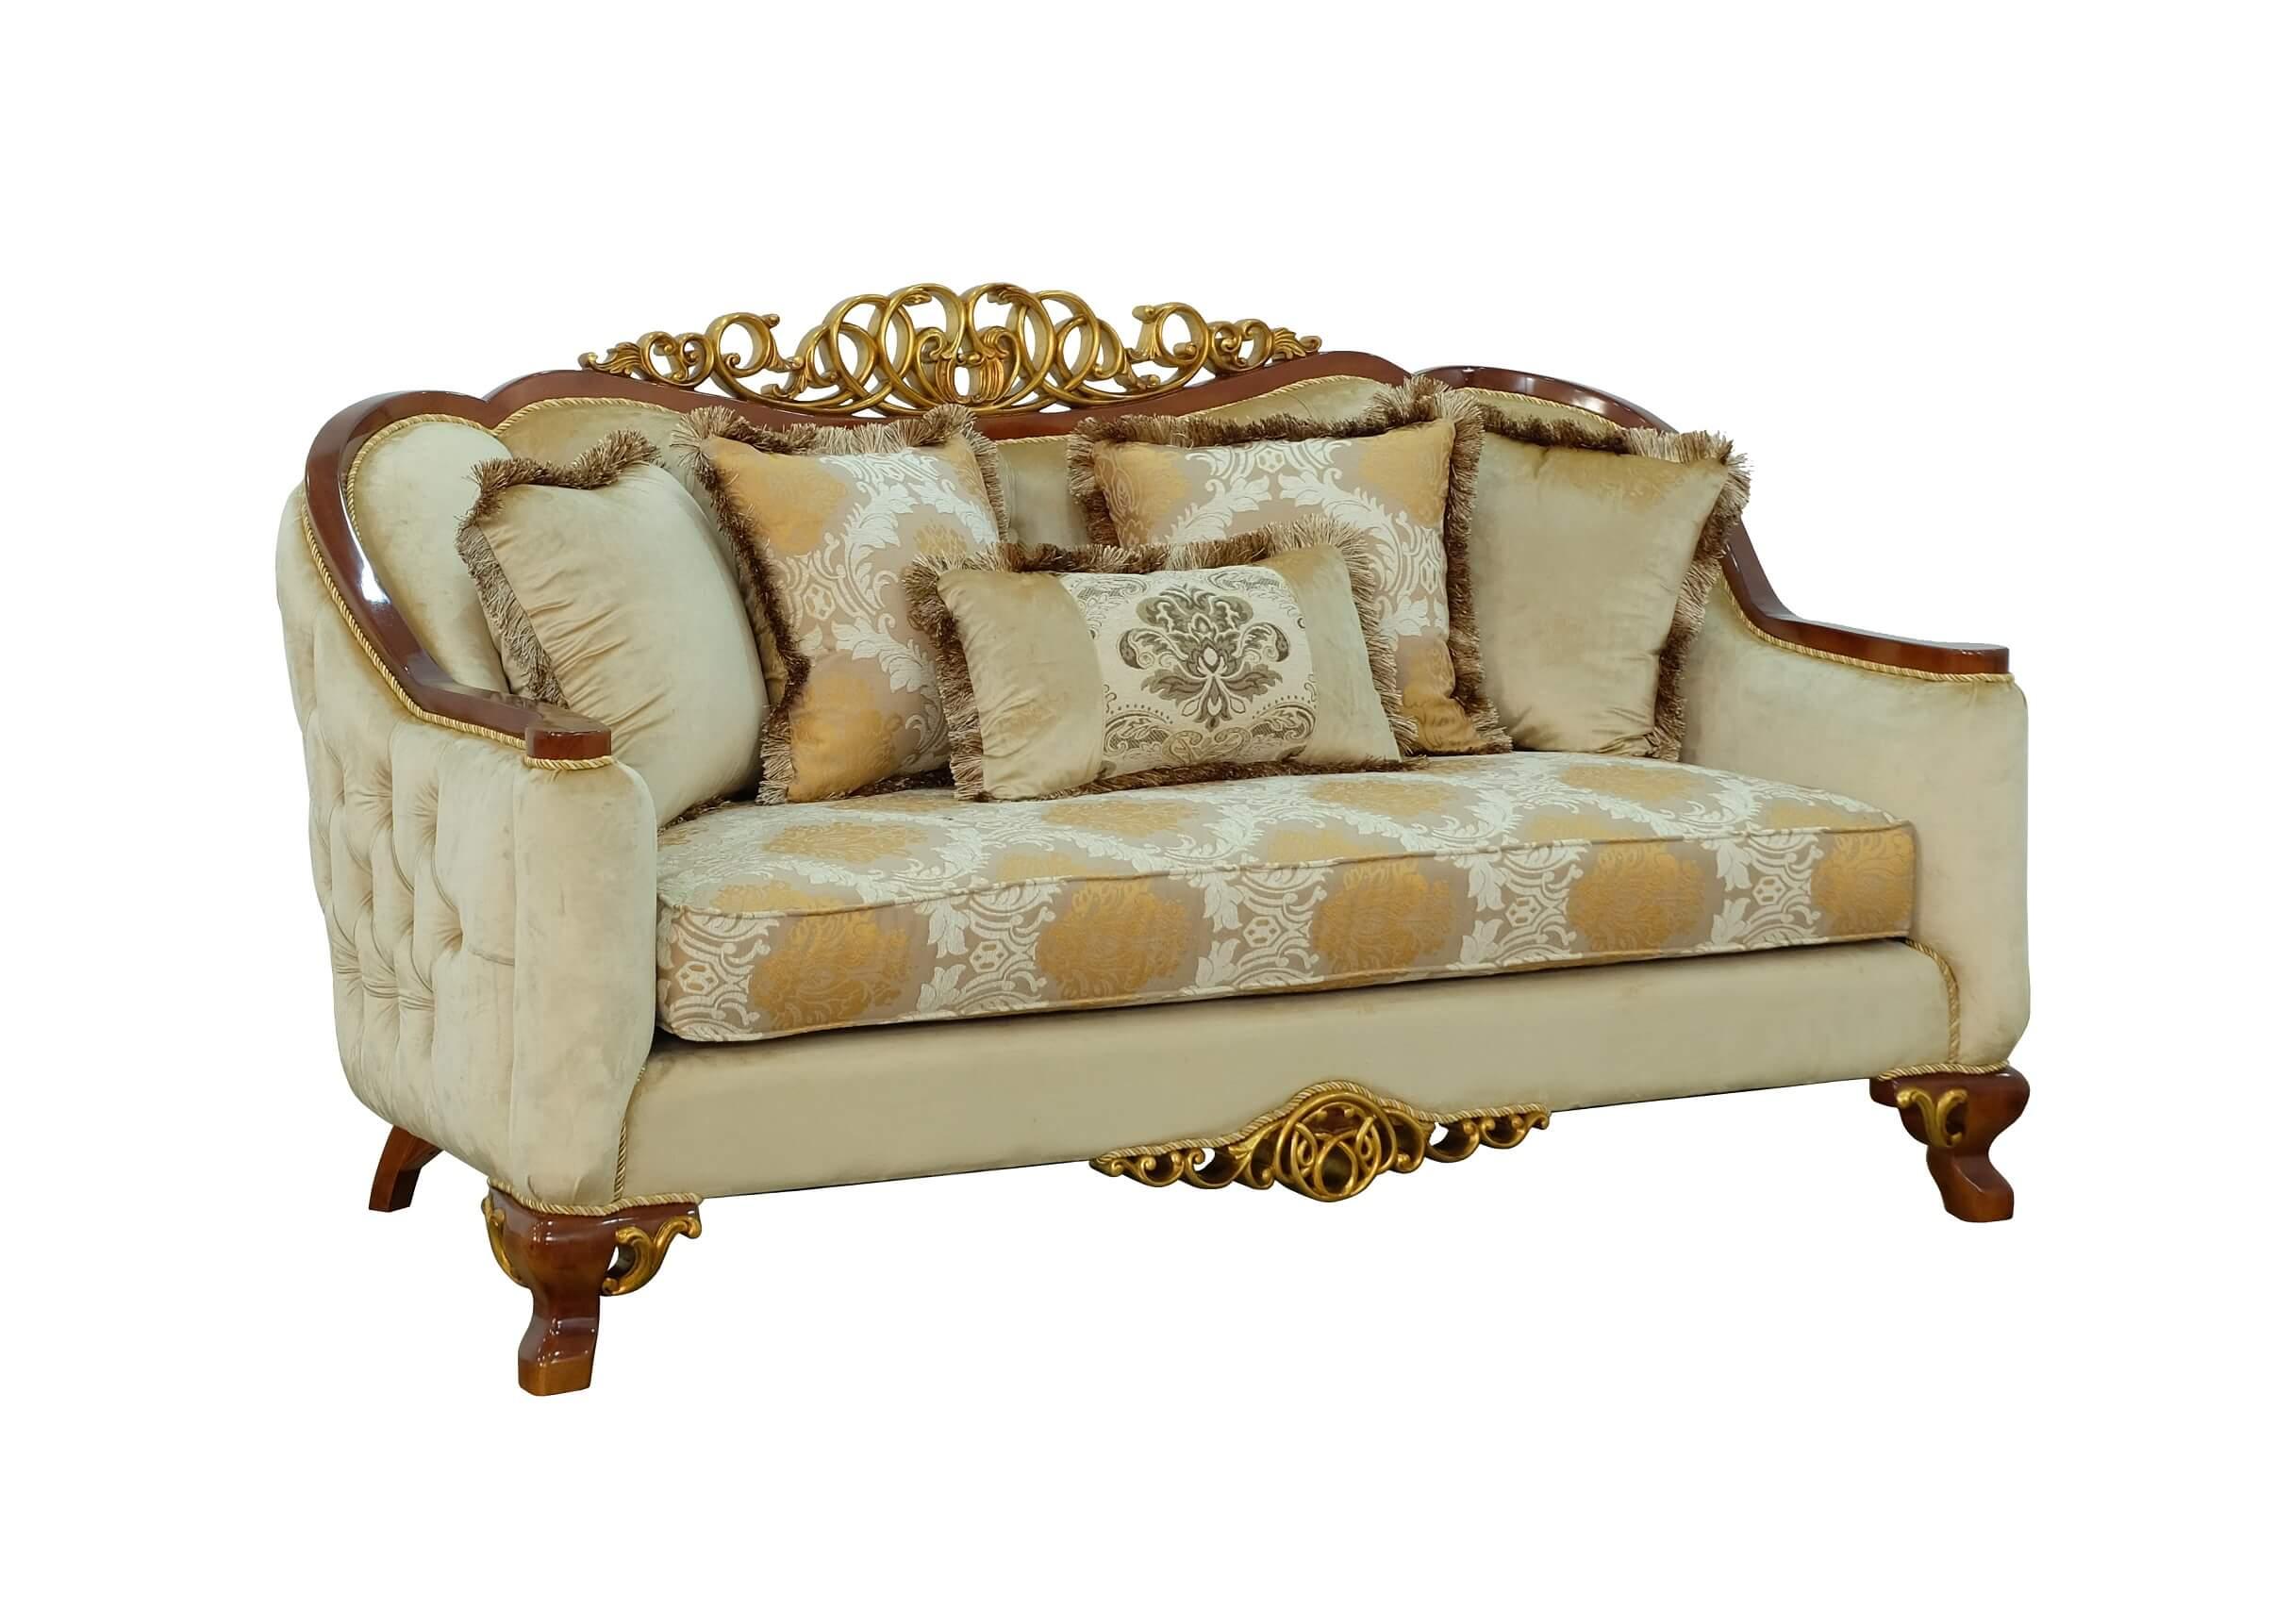 Classic, Traditional Loveseat ANGELICA II 45354-L in Gold, Brown Fabric